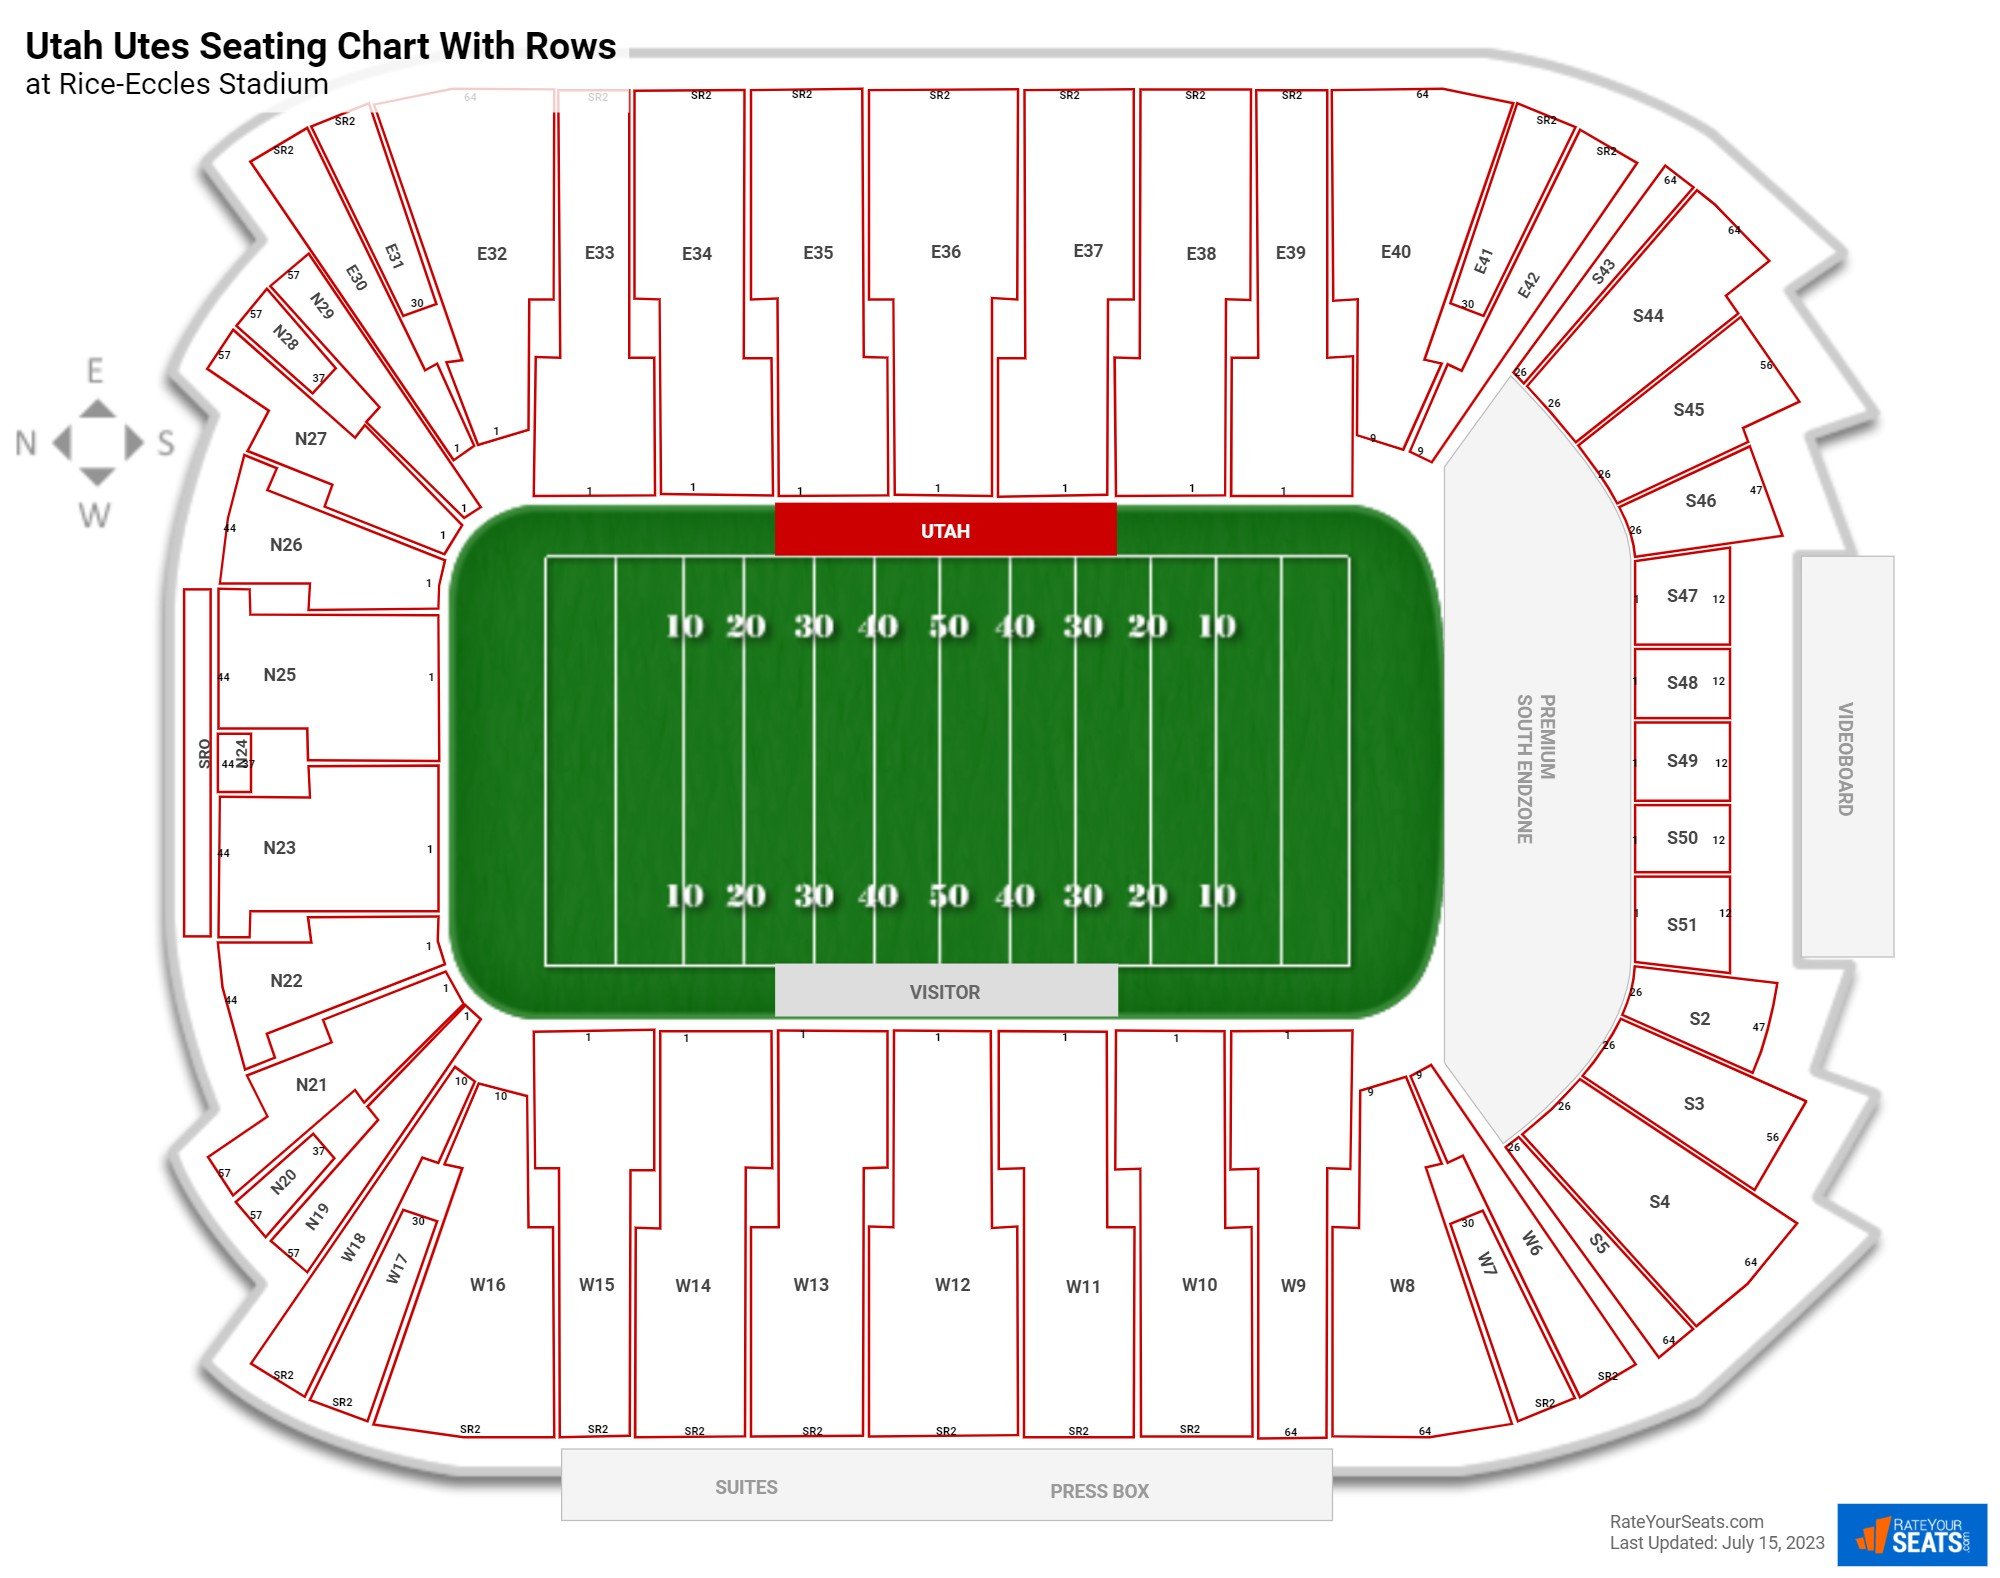 Rice-Eccles Stadium seating chart with row numbers